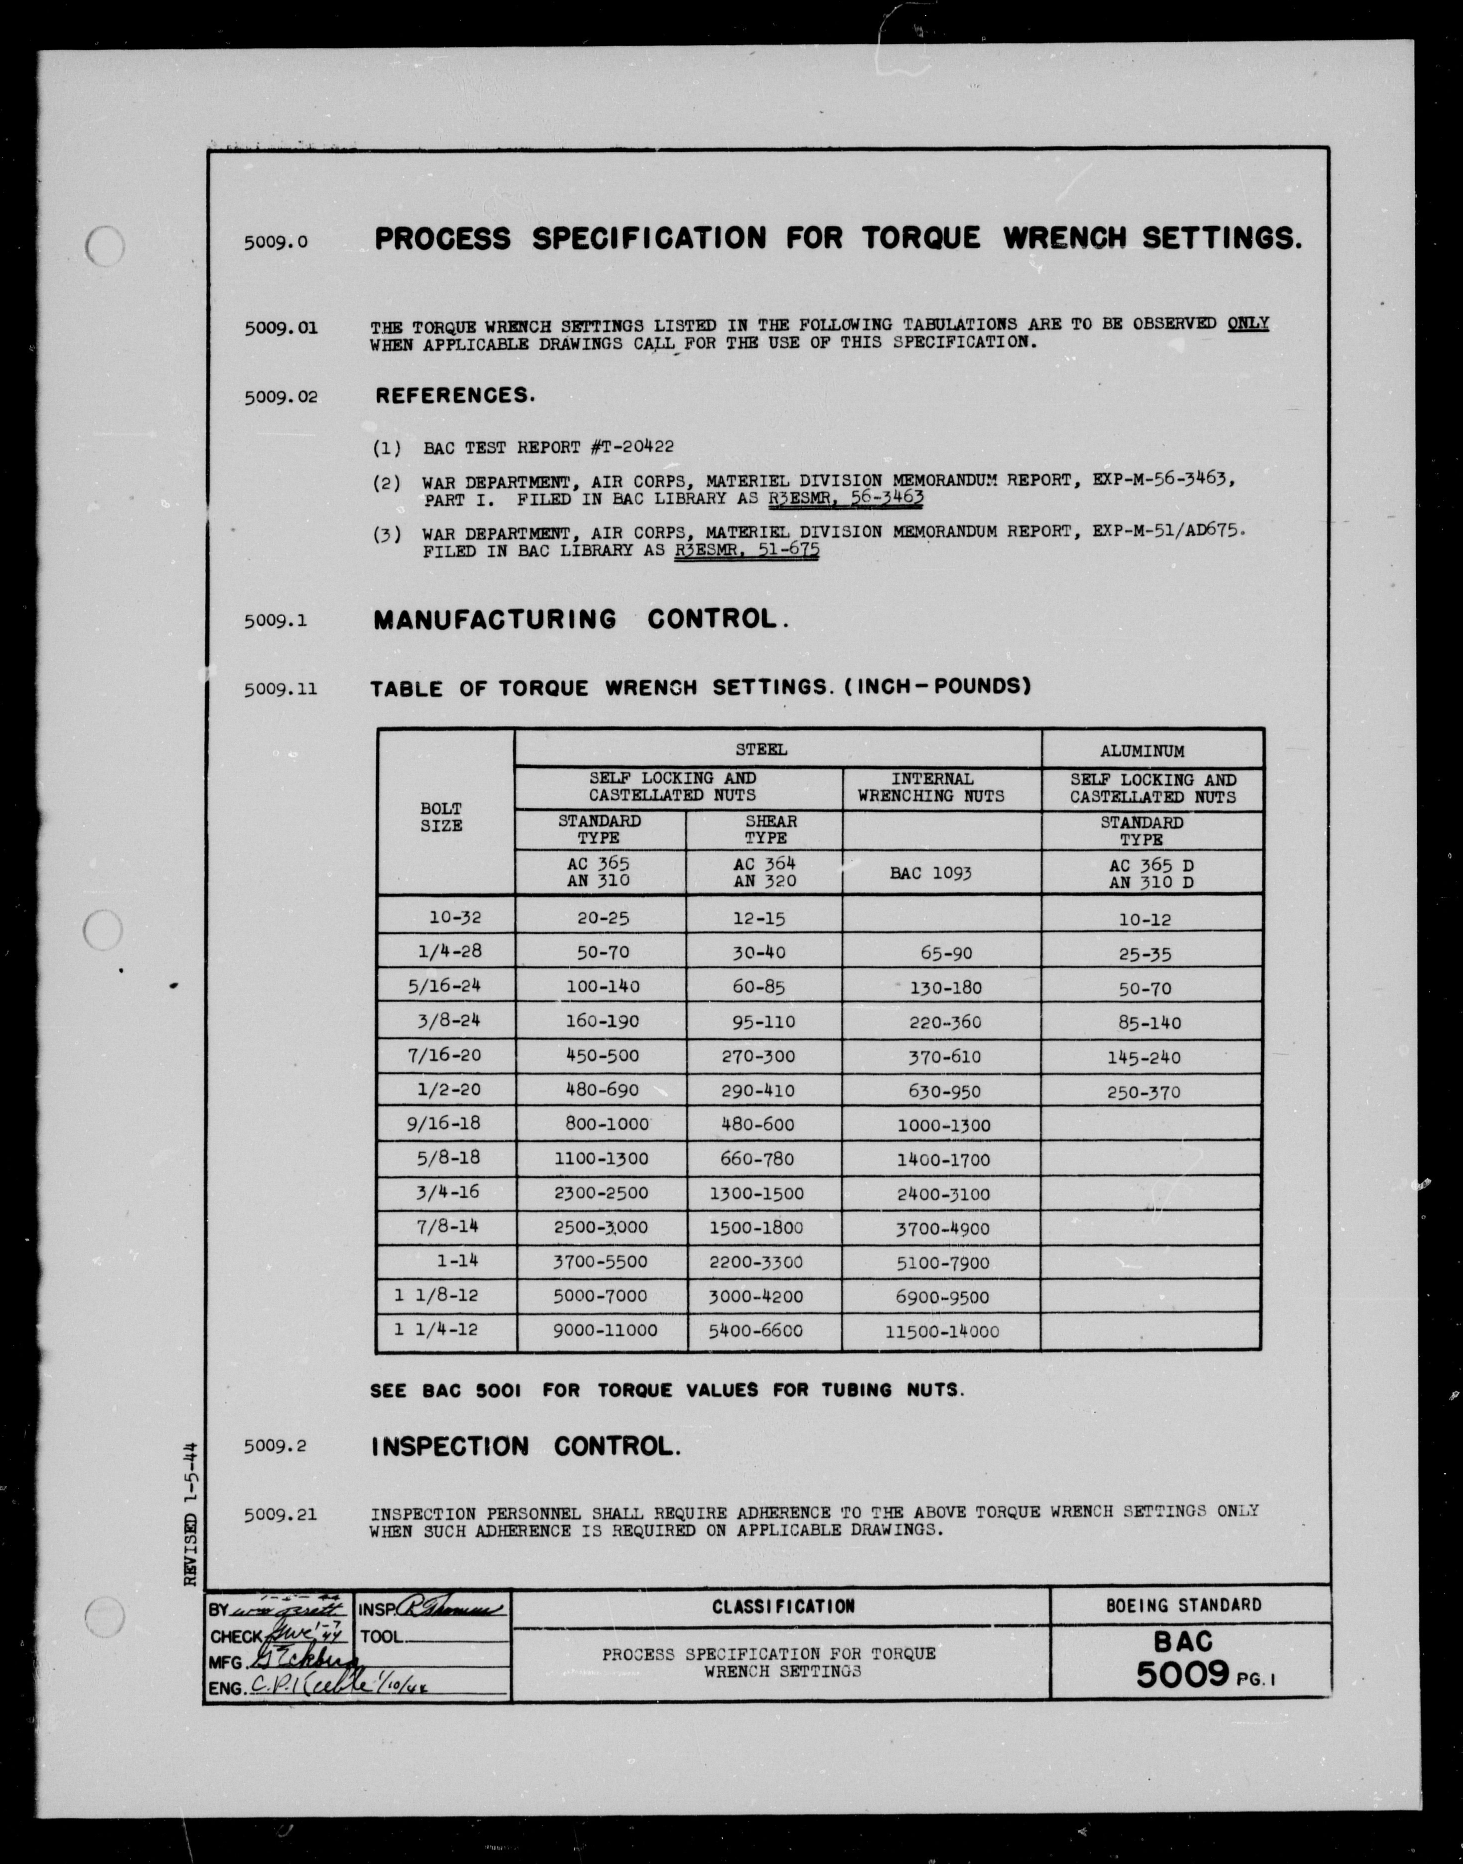 Sample page 1 from AirCorps Library document: Torque Wrench Settings